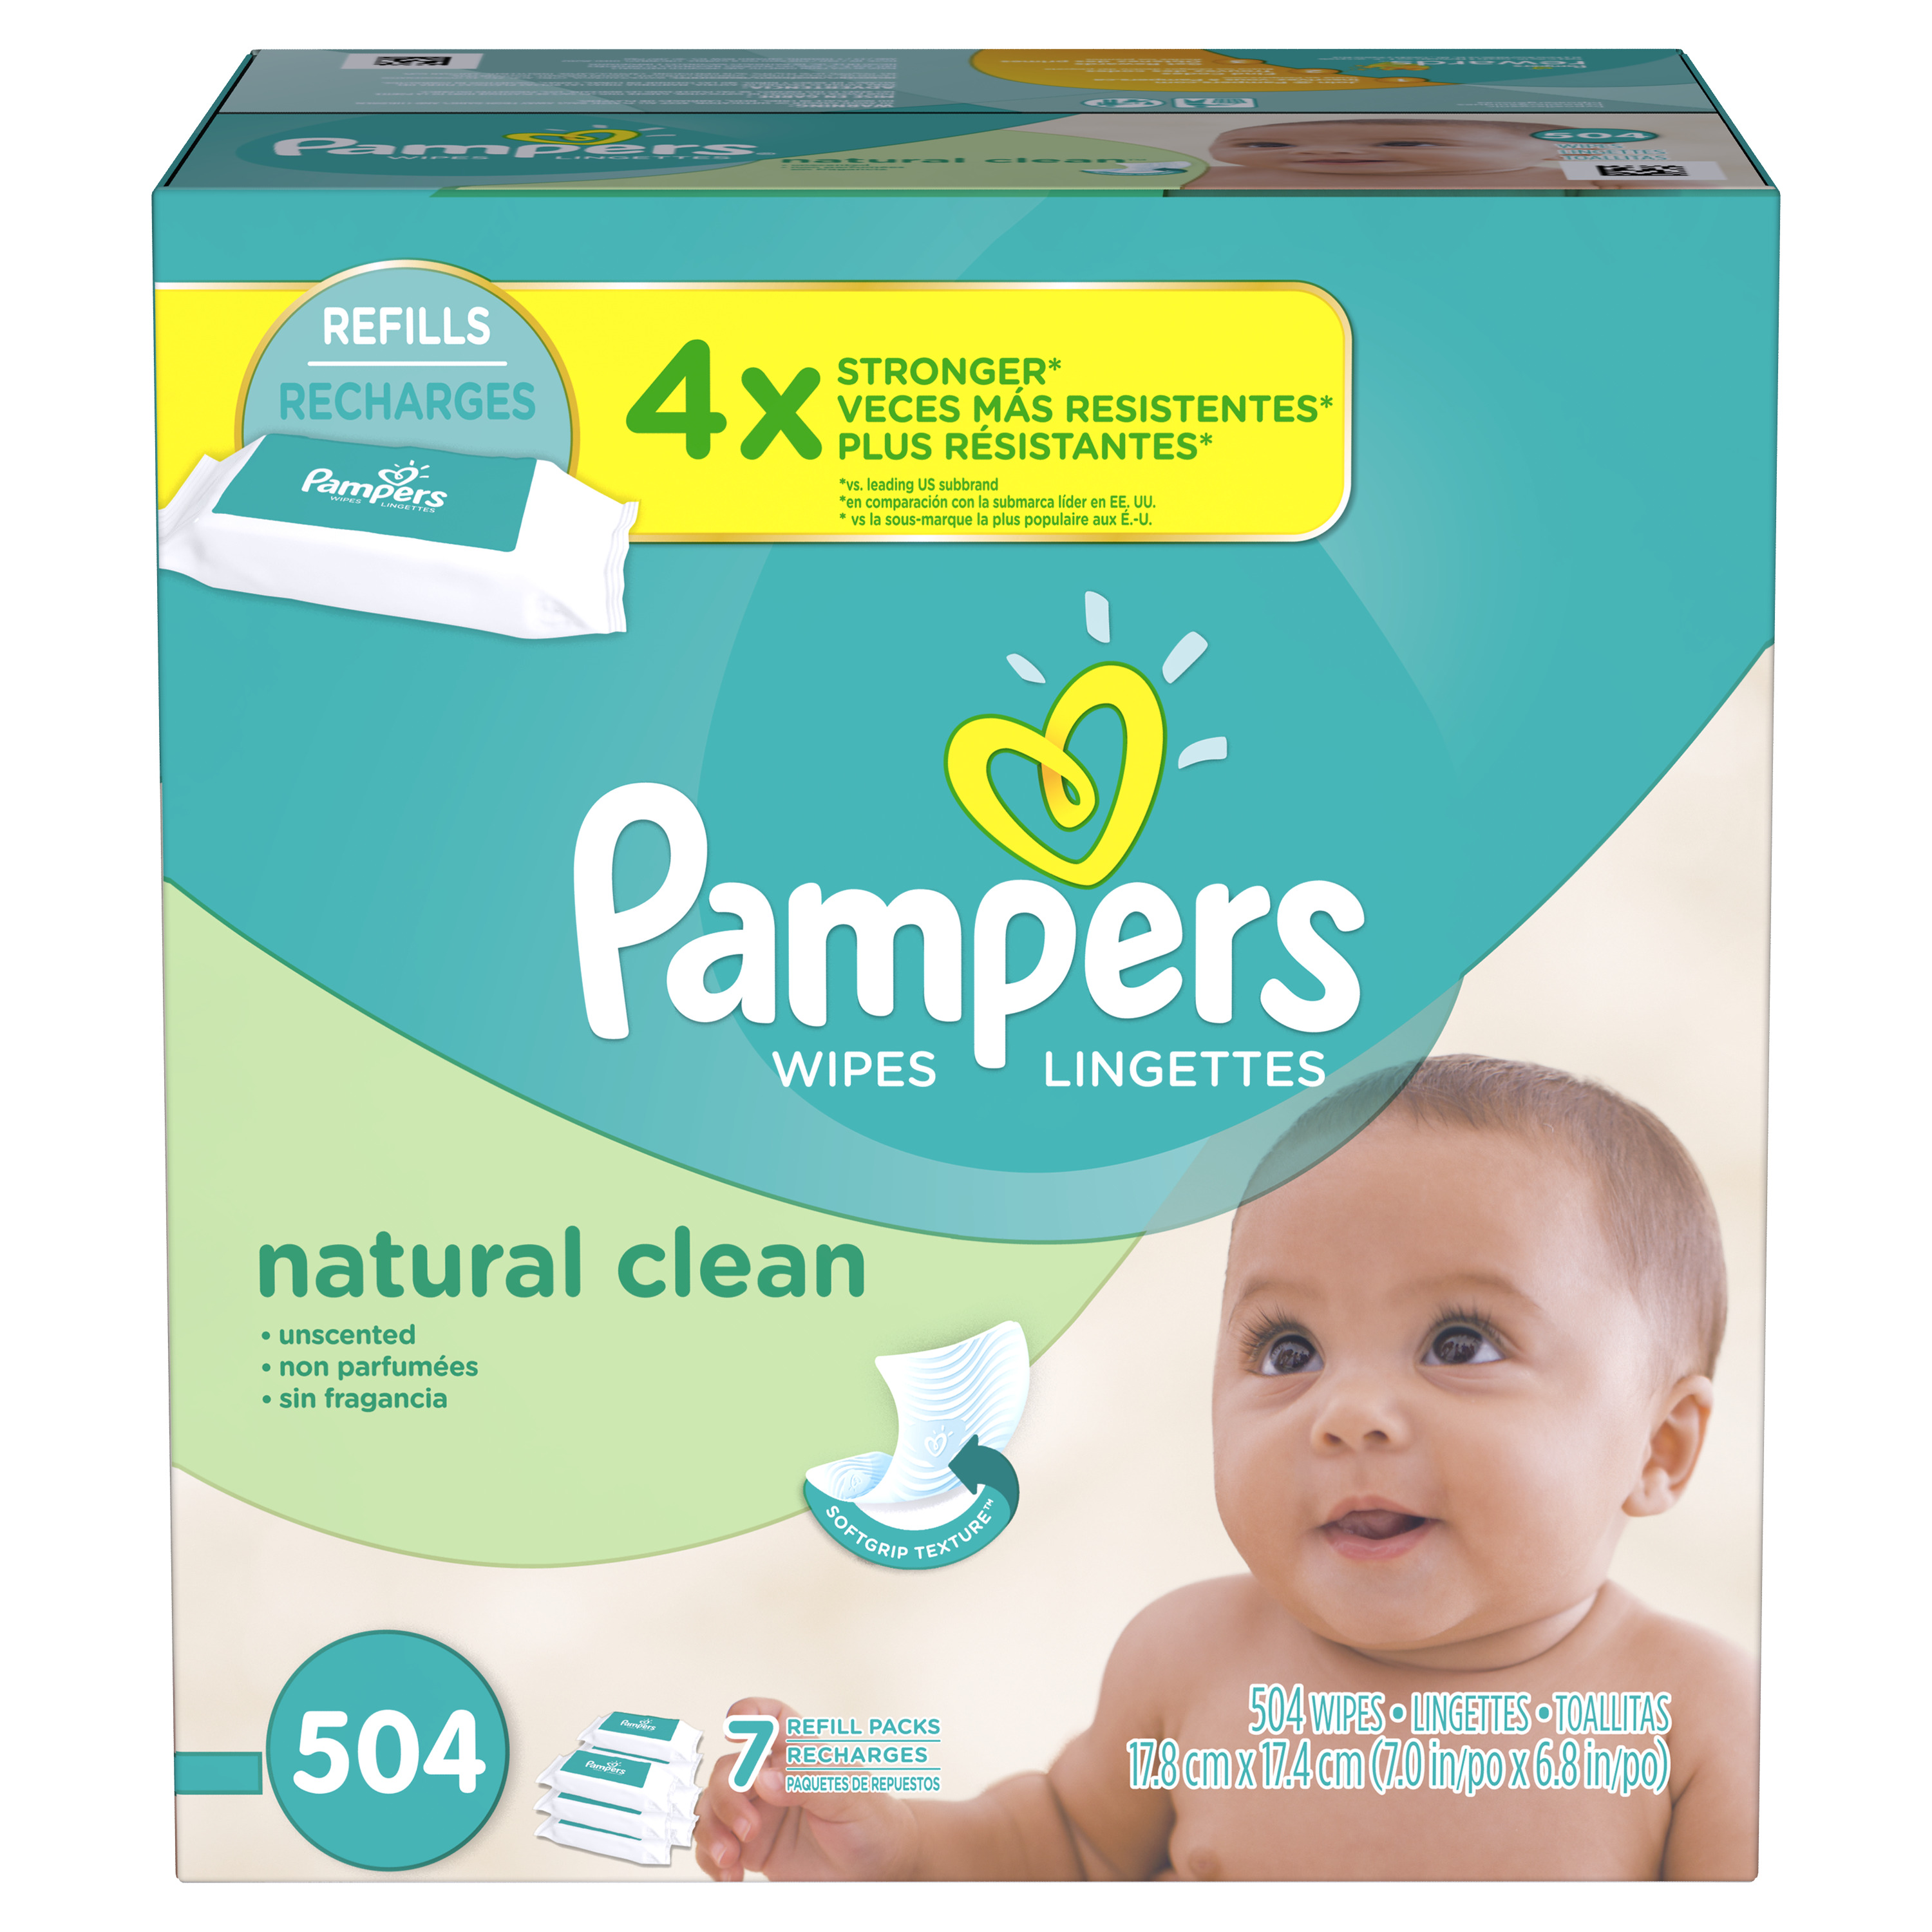 Pampers Baby Wipes Natural Clean 7 Refill Packs, 504 Total Wipes - image 5 of 7